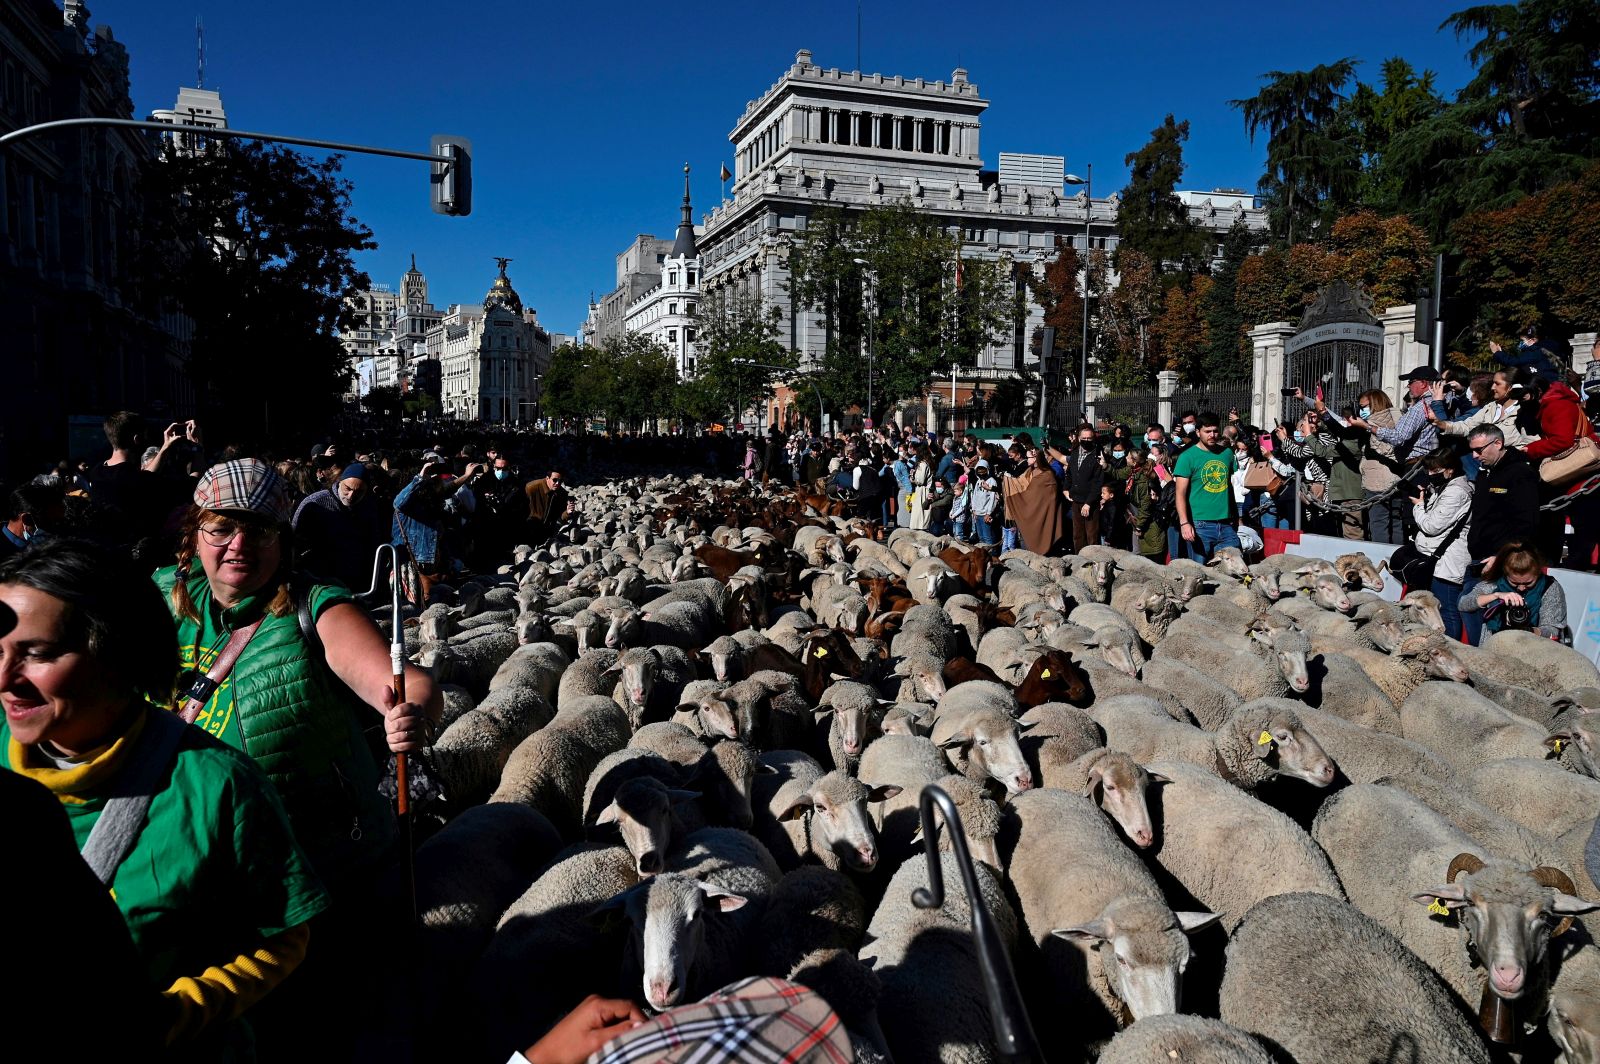 epa09543094 One thousand Merino sheep and one hundred Retinta goats from the flock of the Mesta Council are walking the streets of downtown Madrid, central Spain, 24 October 2021, during the Feast of Transhumance, a tradition during which cattle breeders use ancient livestock trails.  EPA/FERNANDO VILLAR